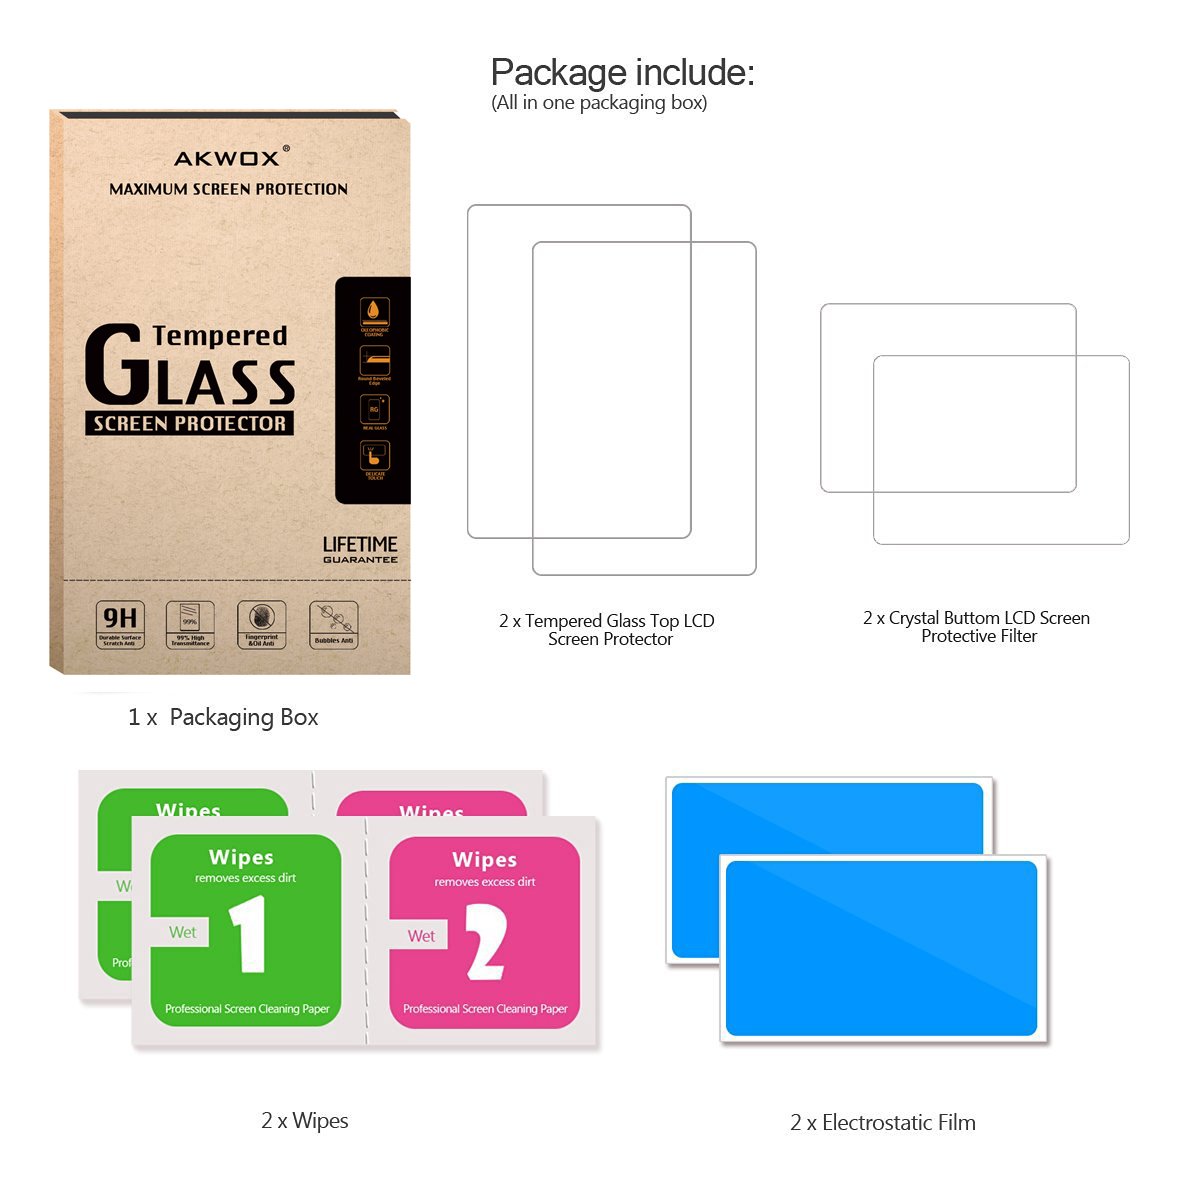 (2 in 1) Tempered Glass Top LCD Screen Protector + HD Clear Crystal PET Buttom LCD Screen Protective Filter for 3DS XL/New 3DS XL